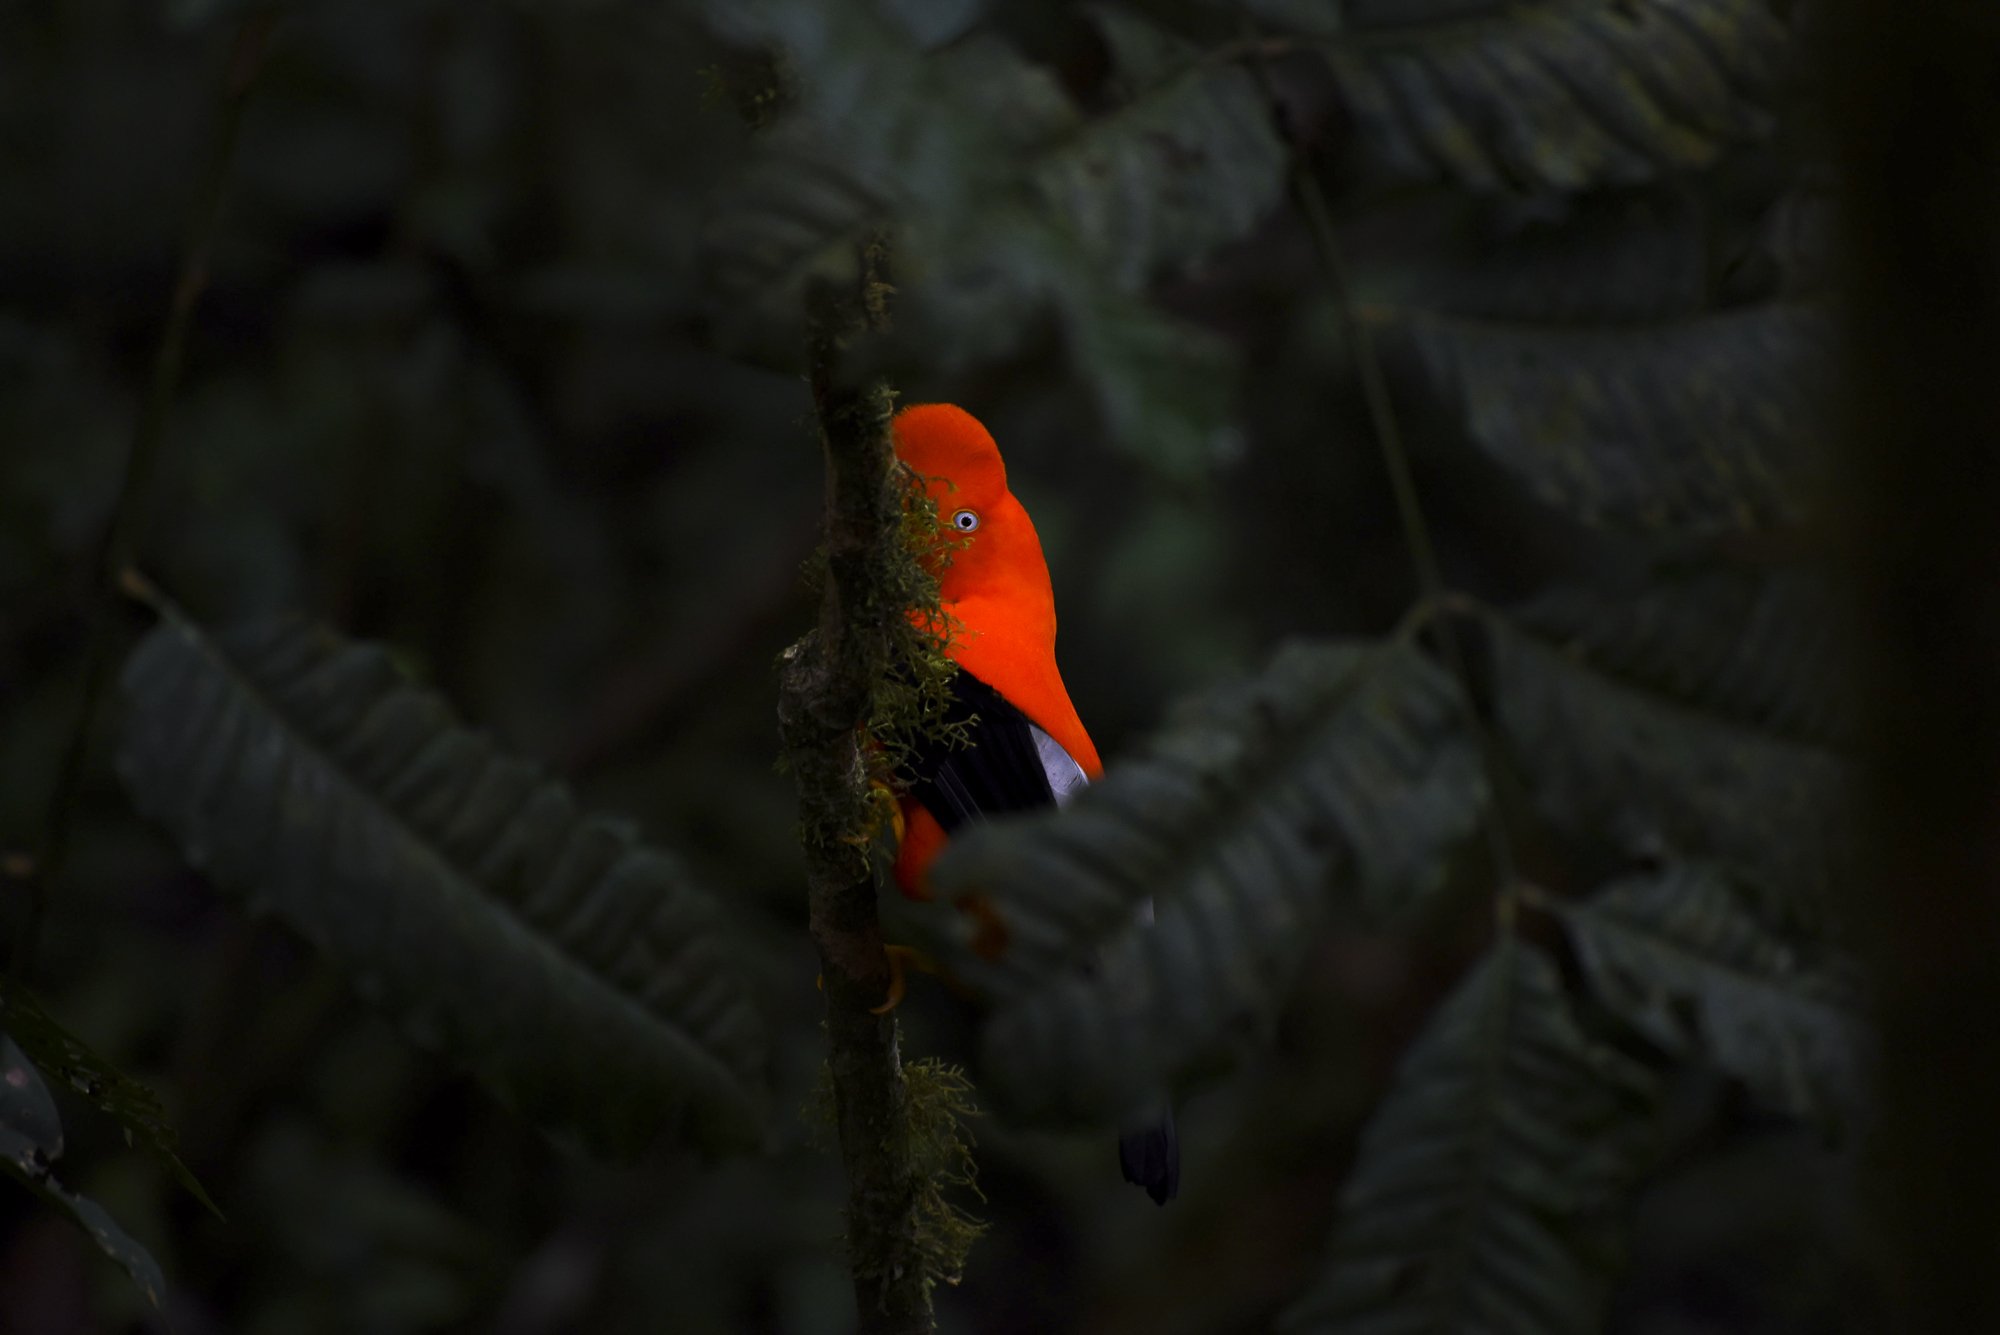  A gallito de las Rocas (Andean Cock-of-the-Rock) peers behind a branch at a lek in the cloud forest of Peru. Males gather regularly to try to impress female birds with their moves, plumage, and calls.  